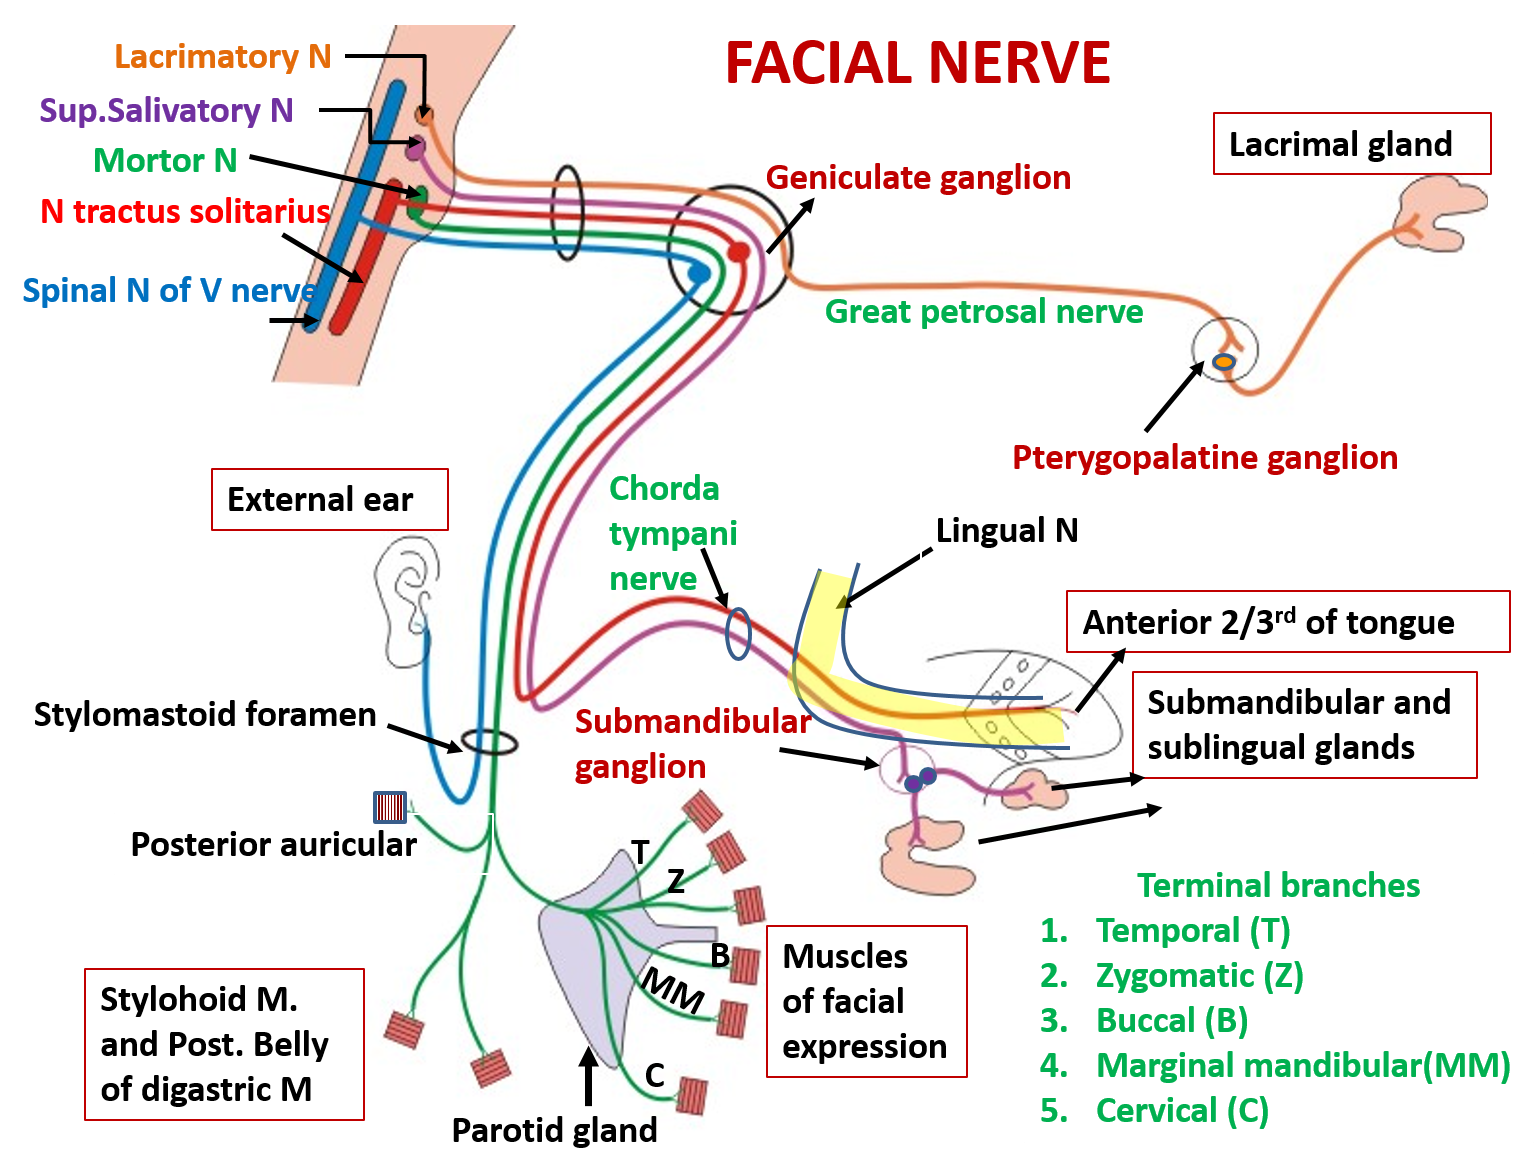 facial nerve nuclei and branches